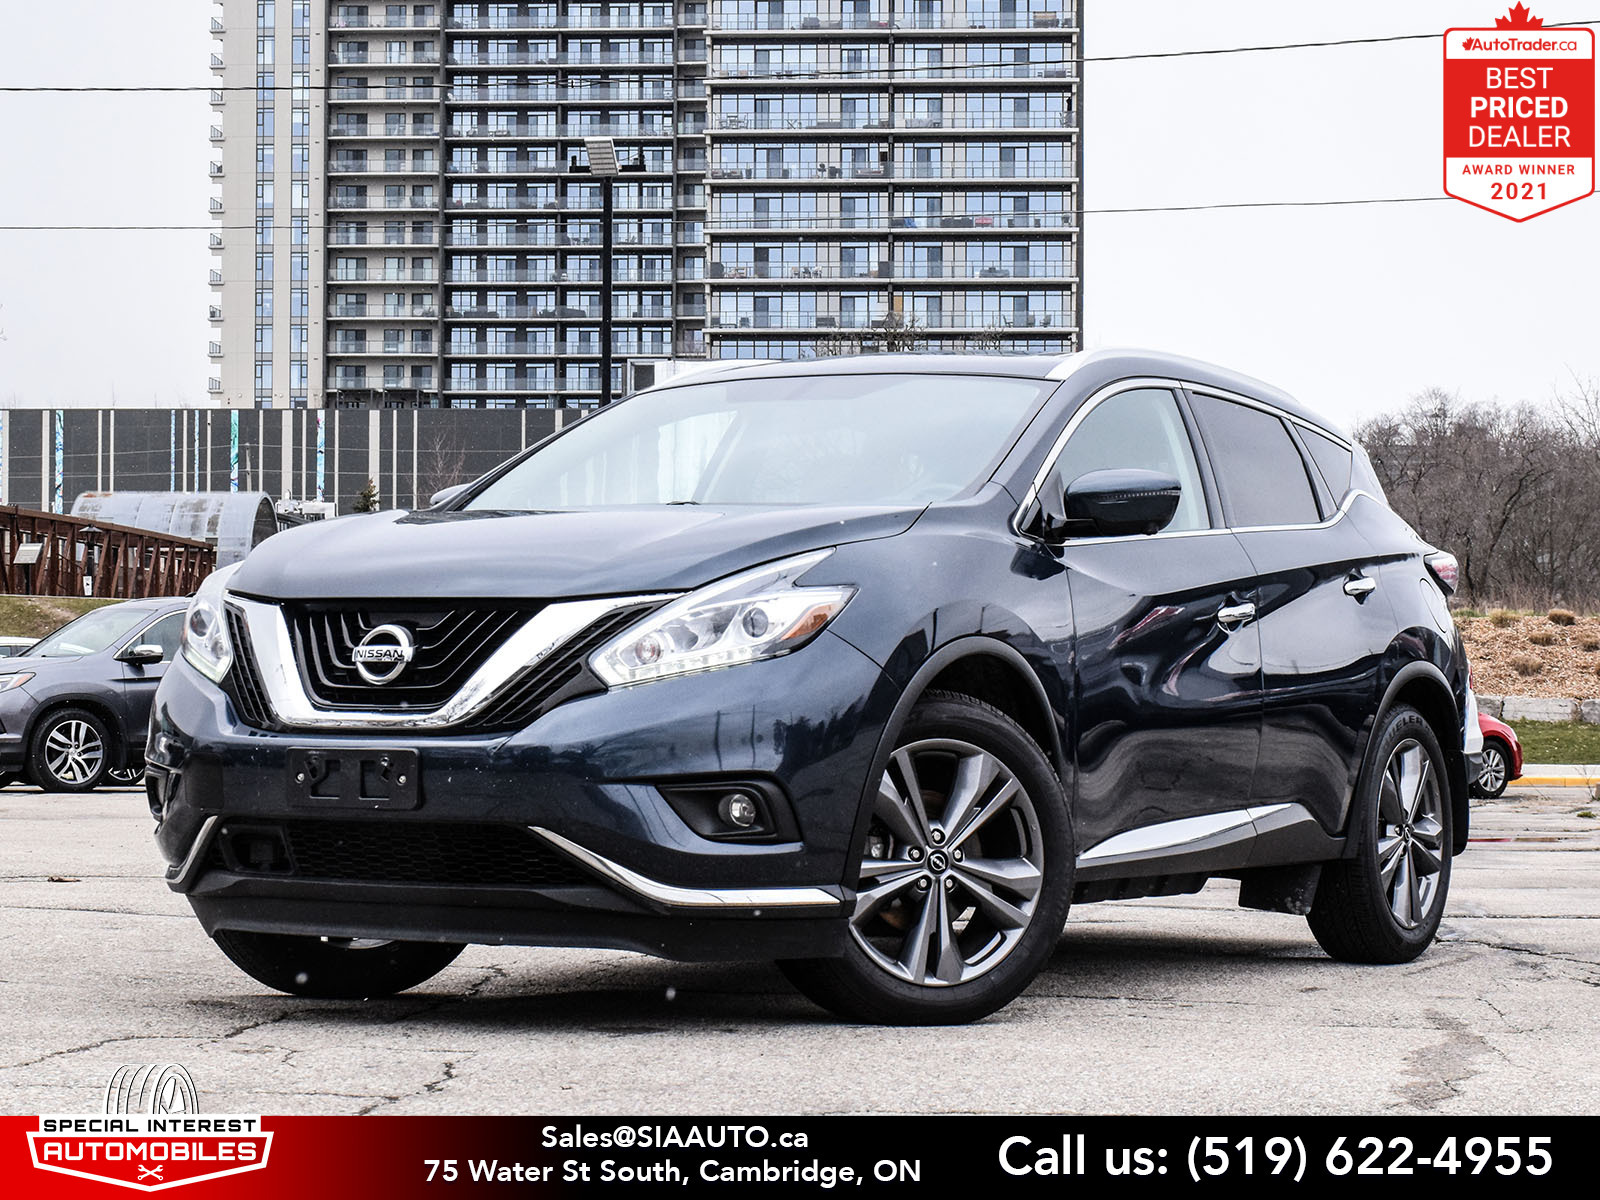 2018 Nissan Murano AWD Platinum * Accident Free * Certified * Loaded